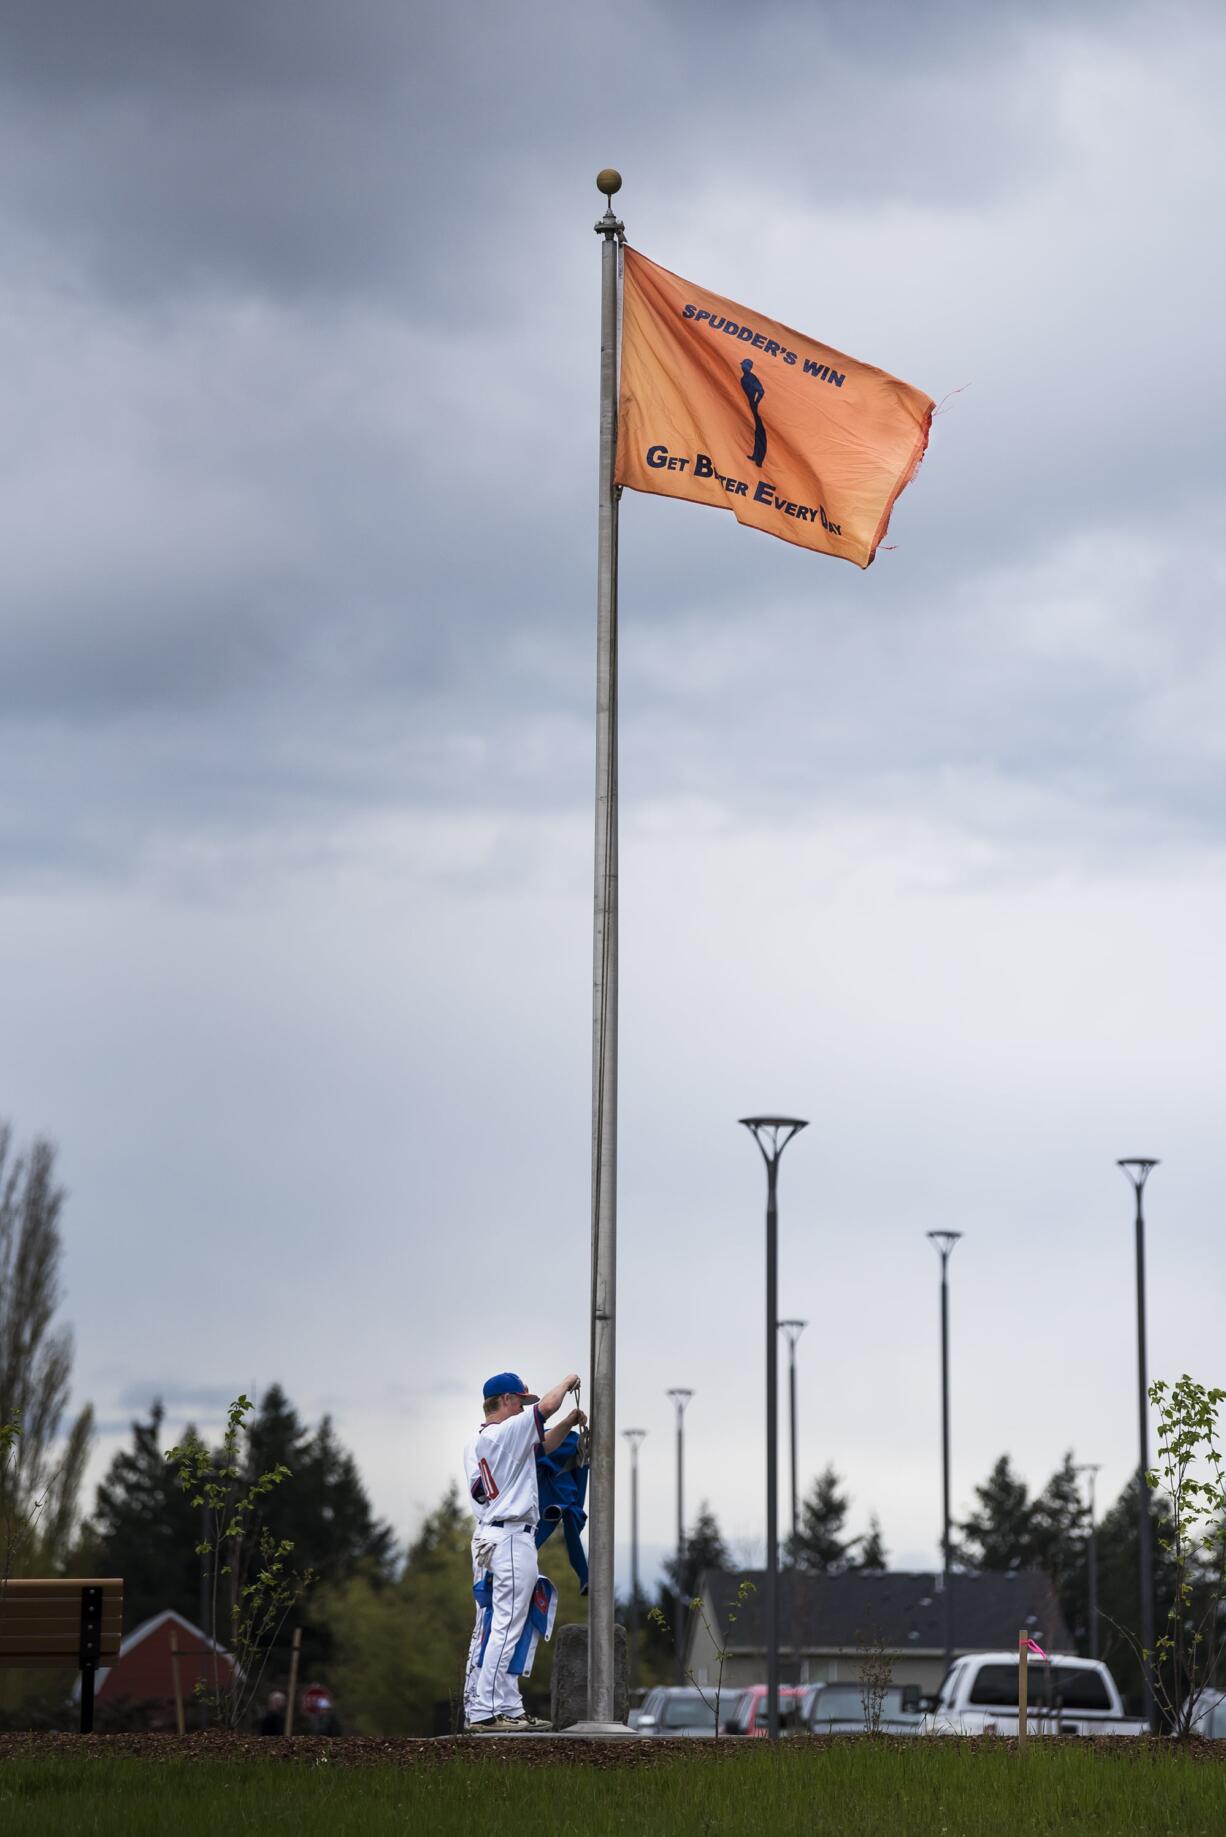 Ridgefield players raise a flag declaring a Spudders’ Victory following their win over Columbia River at the Ridgefield Outdoor Recreation Center on Tuesday night, April 16, 2019.